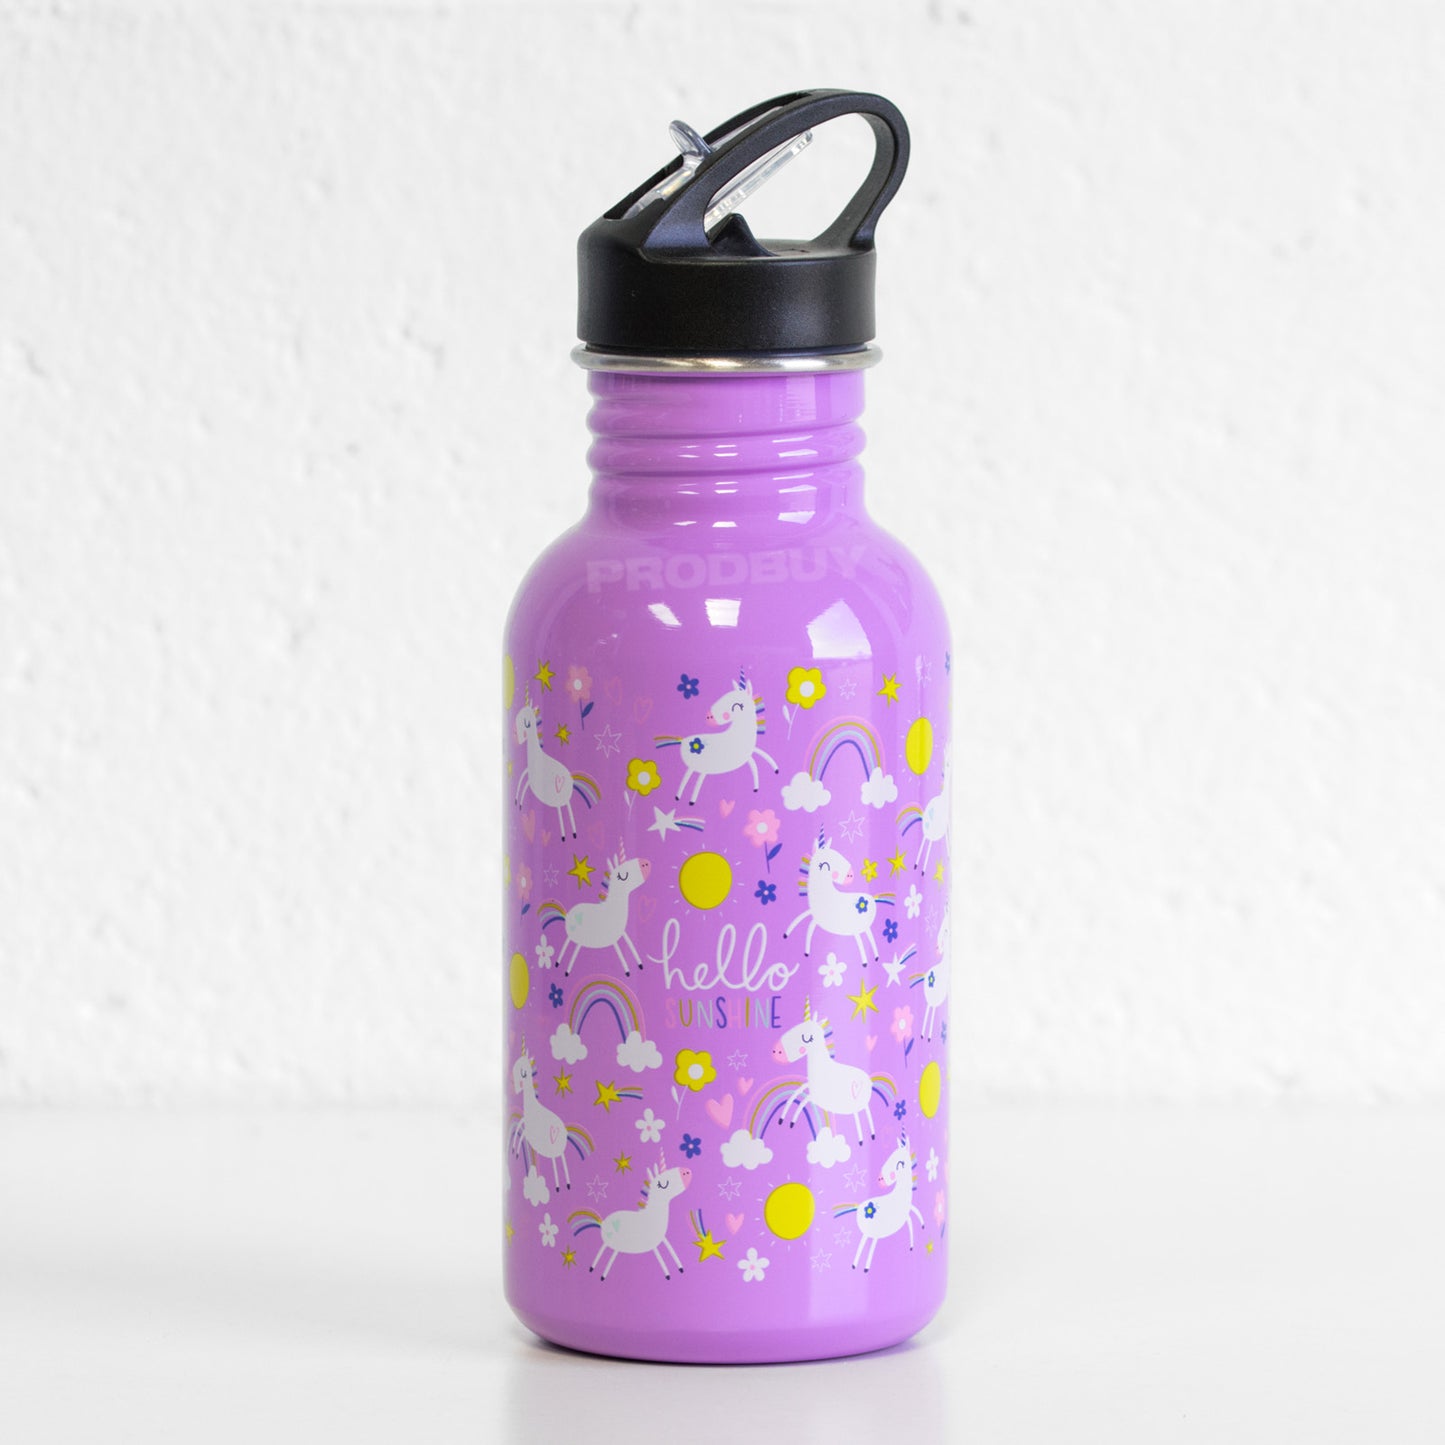 Colourful Stainless Steel Water Bottle with Flip Drinking Straw & 550ml Capacity